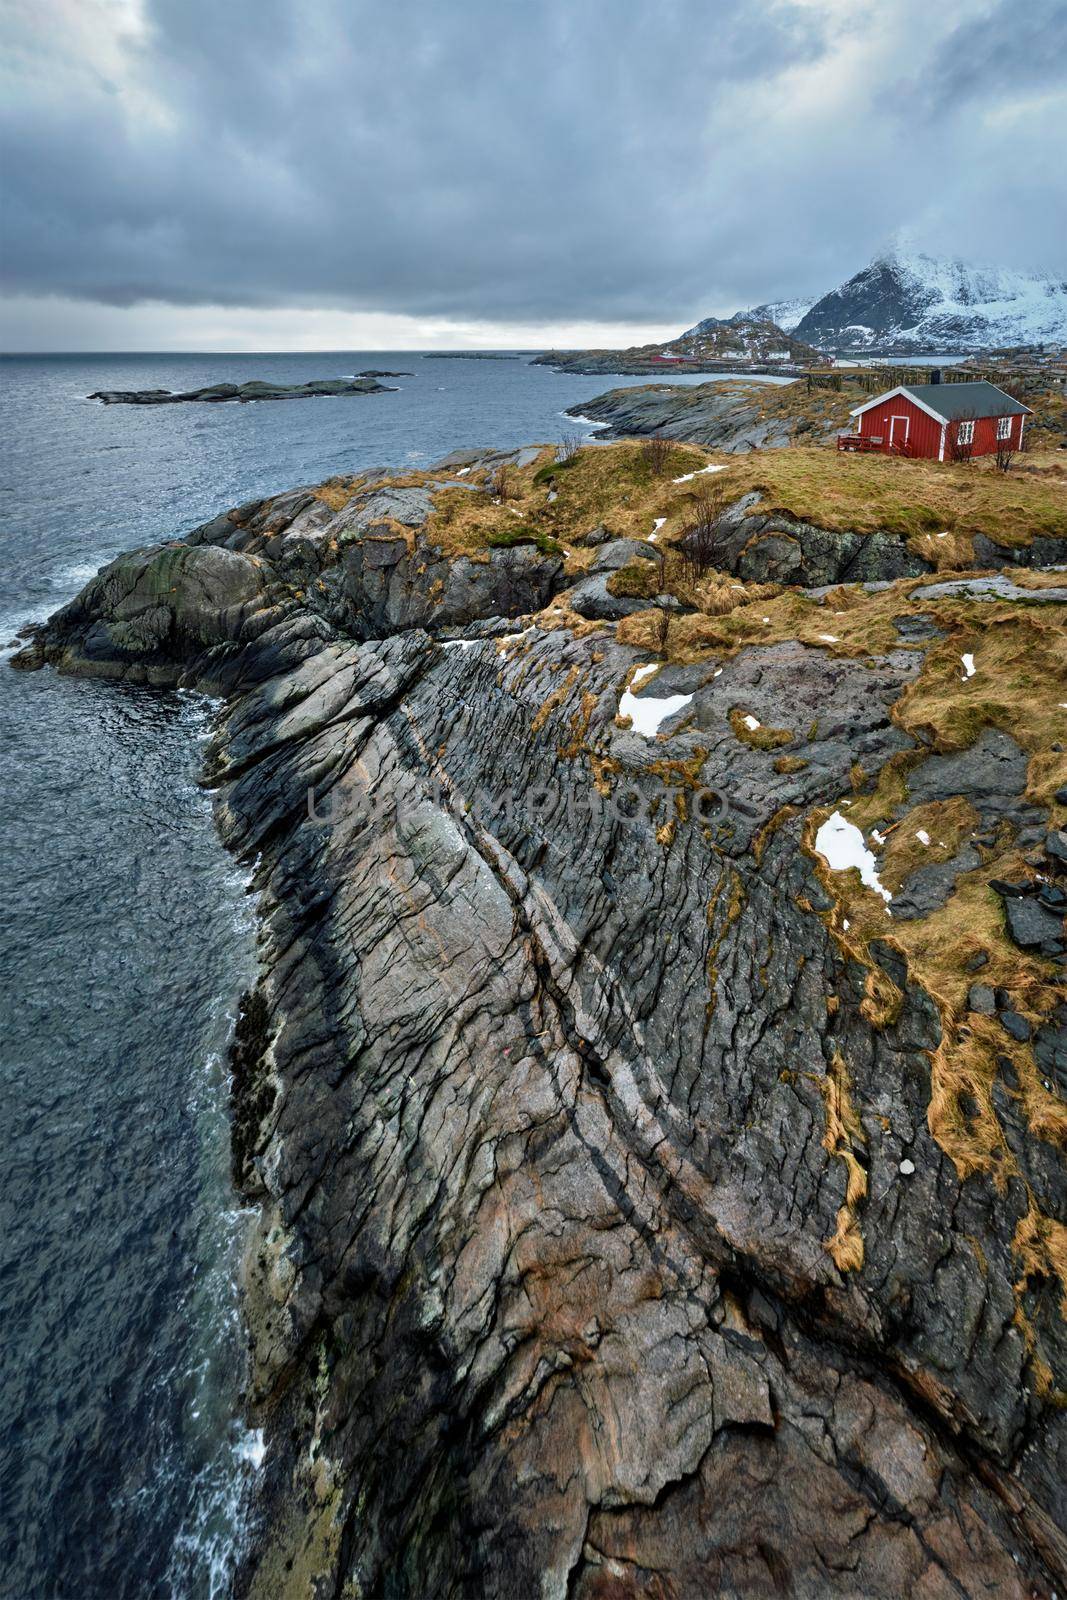 Clif with traditional red rorbu house on Litl-Toppoya islet on Lofoten Islands, Norway in winter